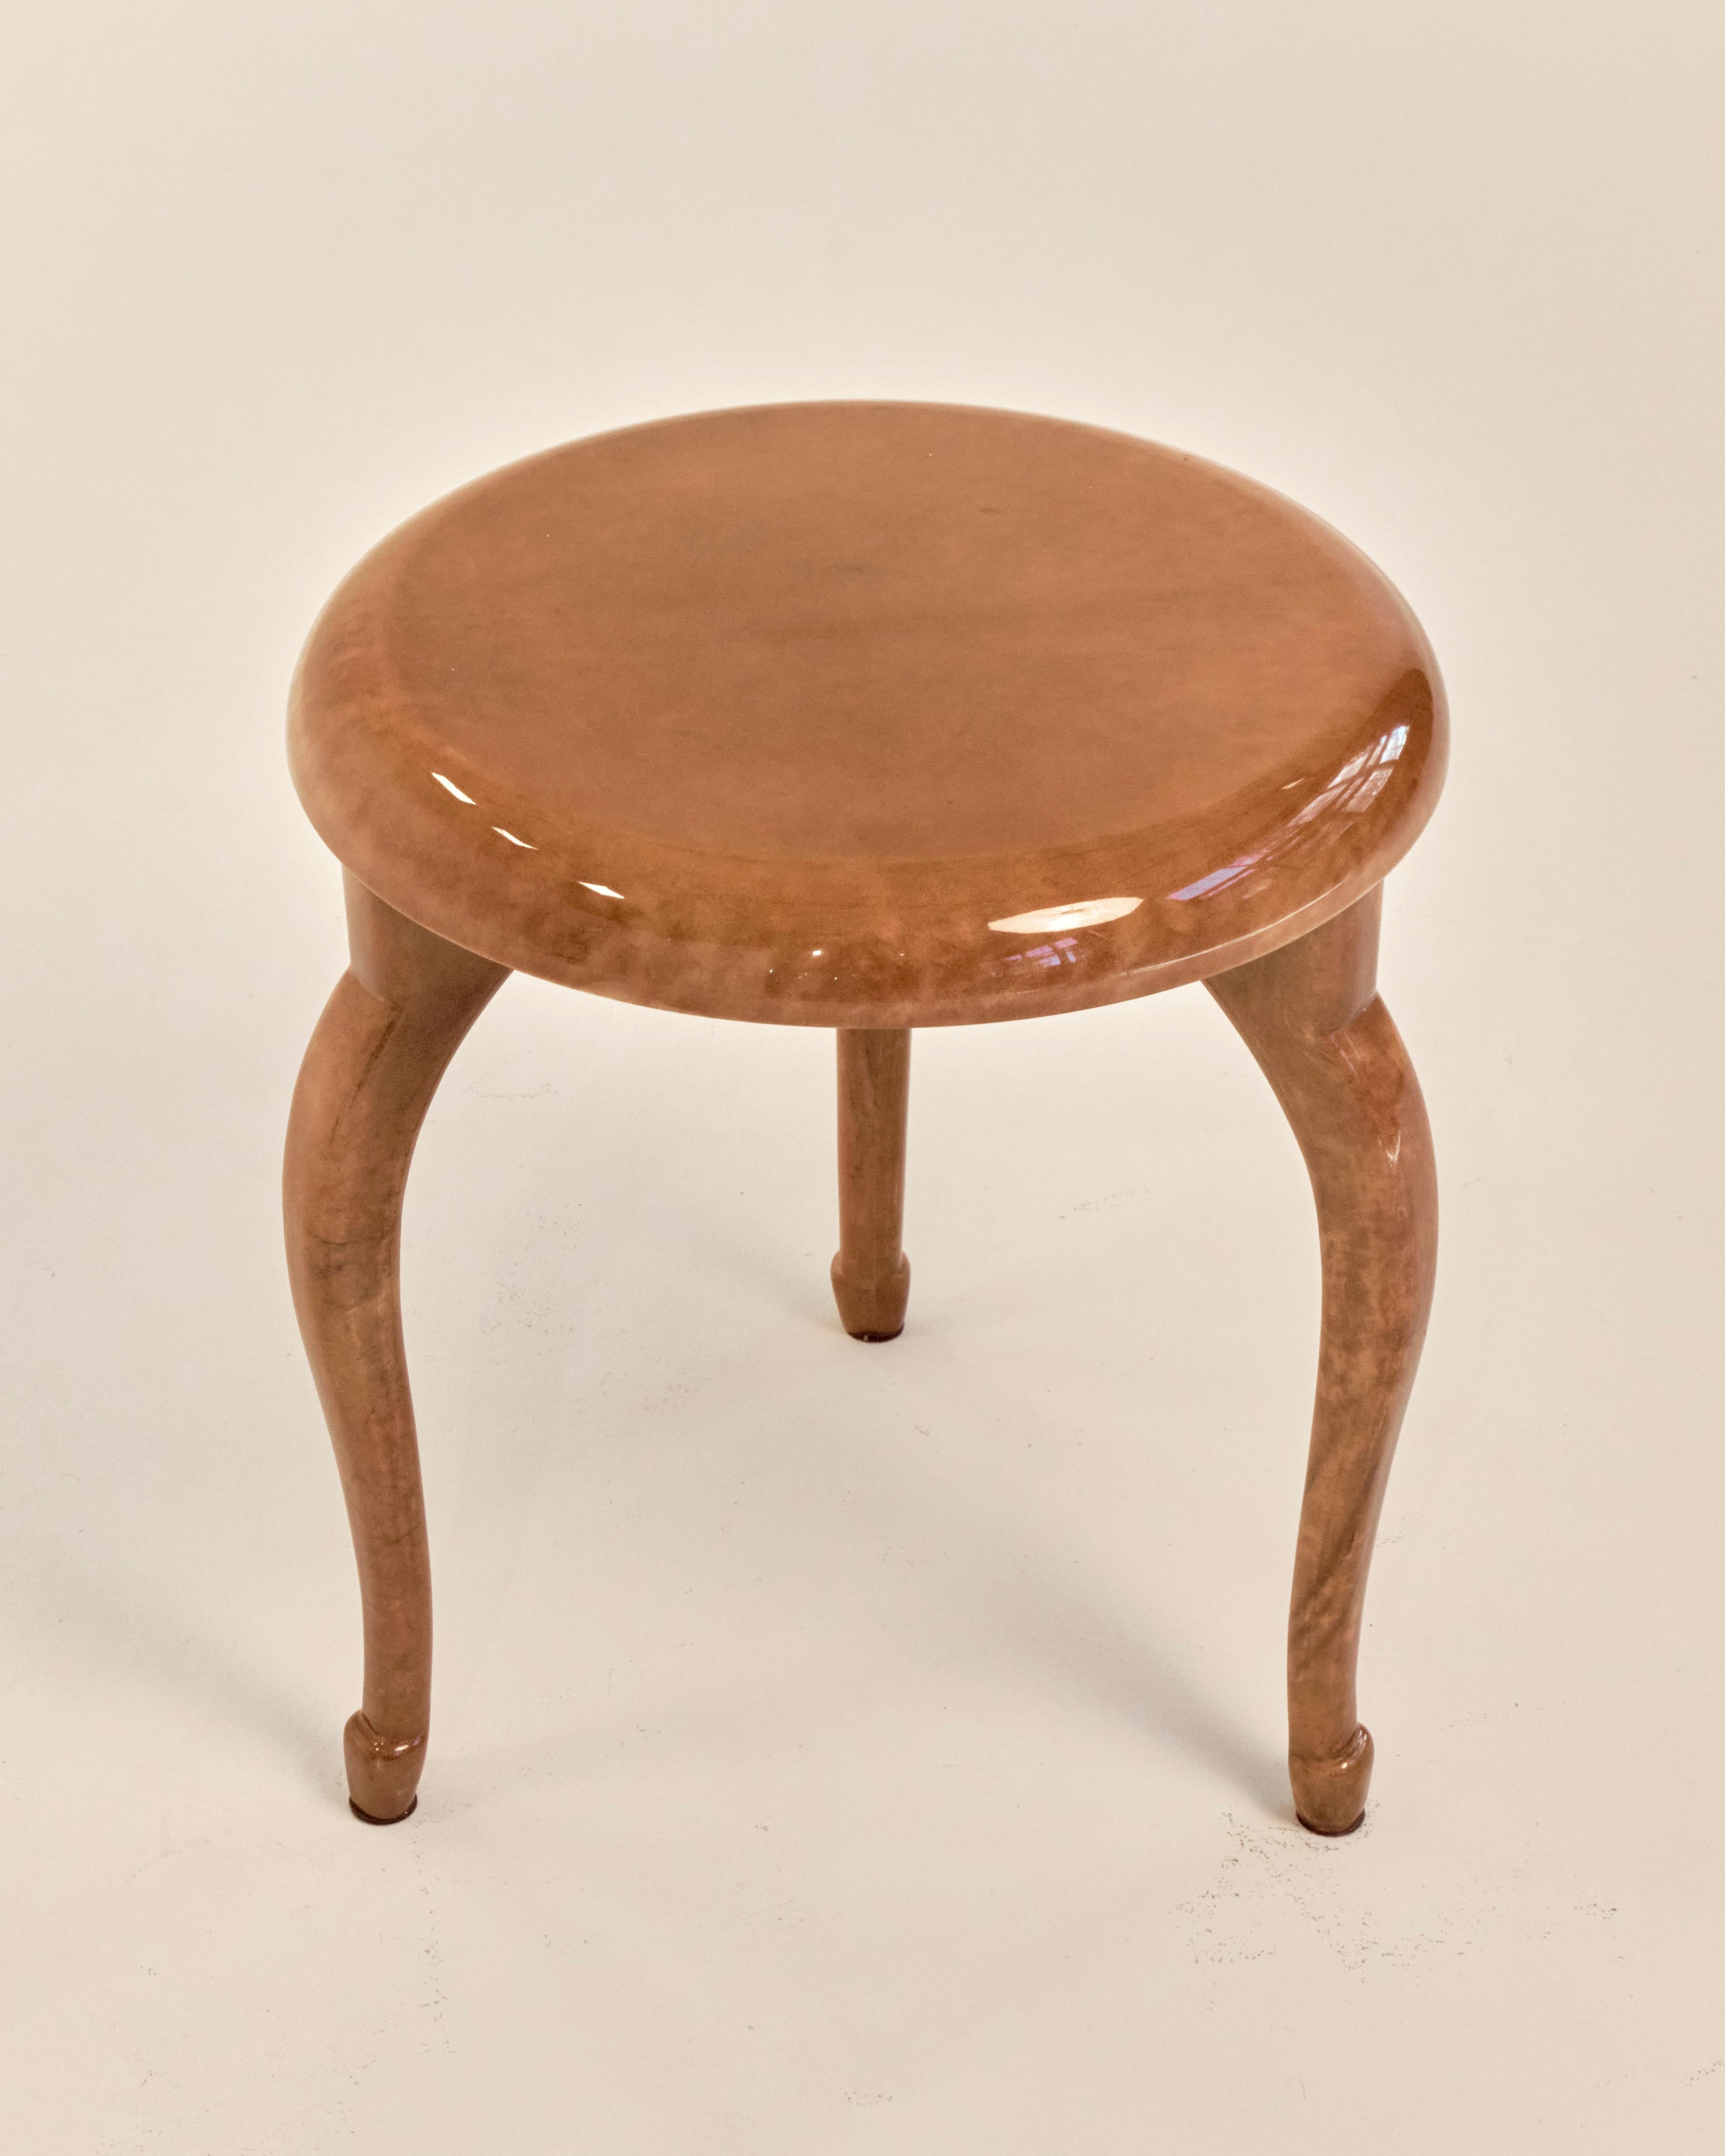 Rare and playful Aldo Tura wood and lacquered goat skin side/end table with curved tapered legs with additional foot detailing element produced in Italy in the 1960's. Table is in great vintage condition with minimal scratches. 

Aldo Tura